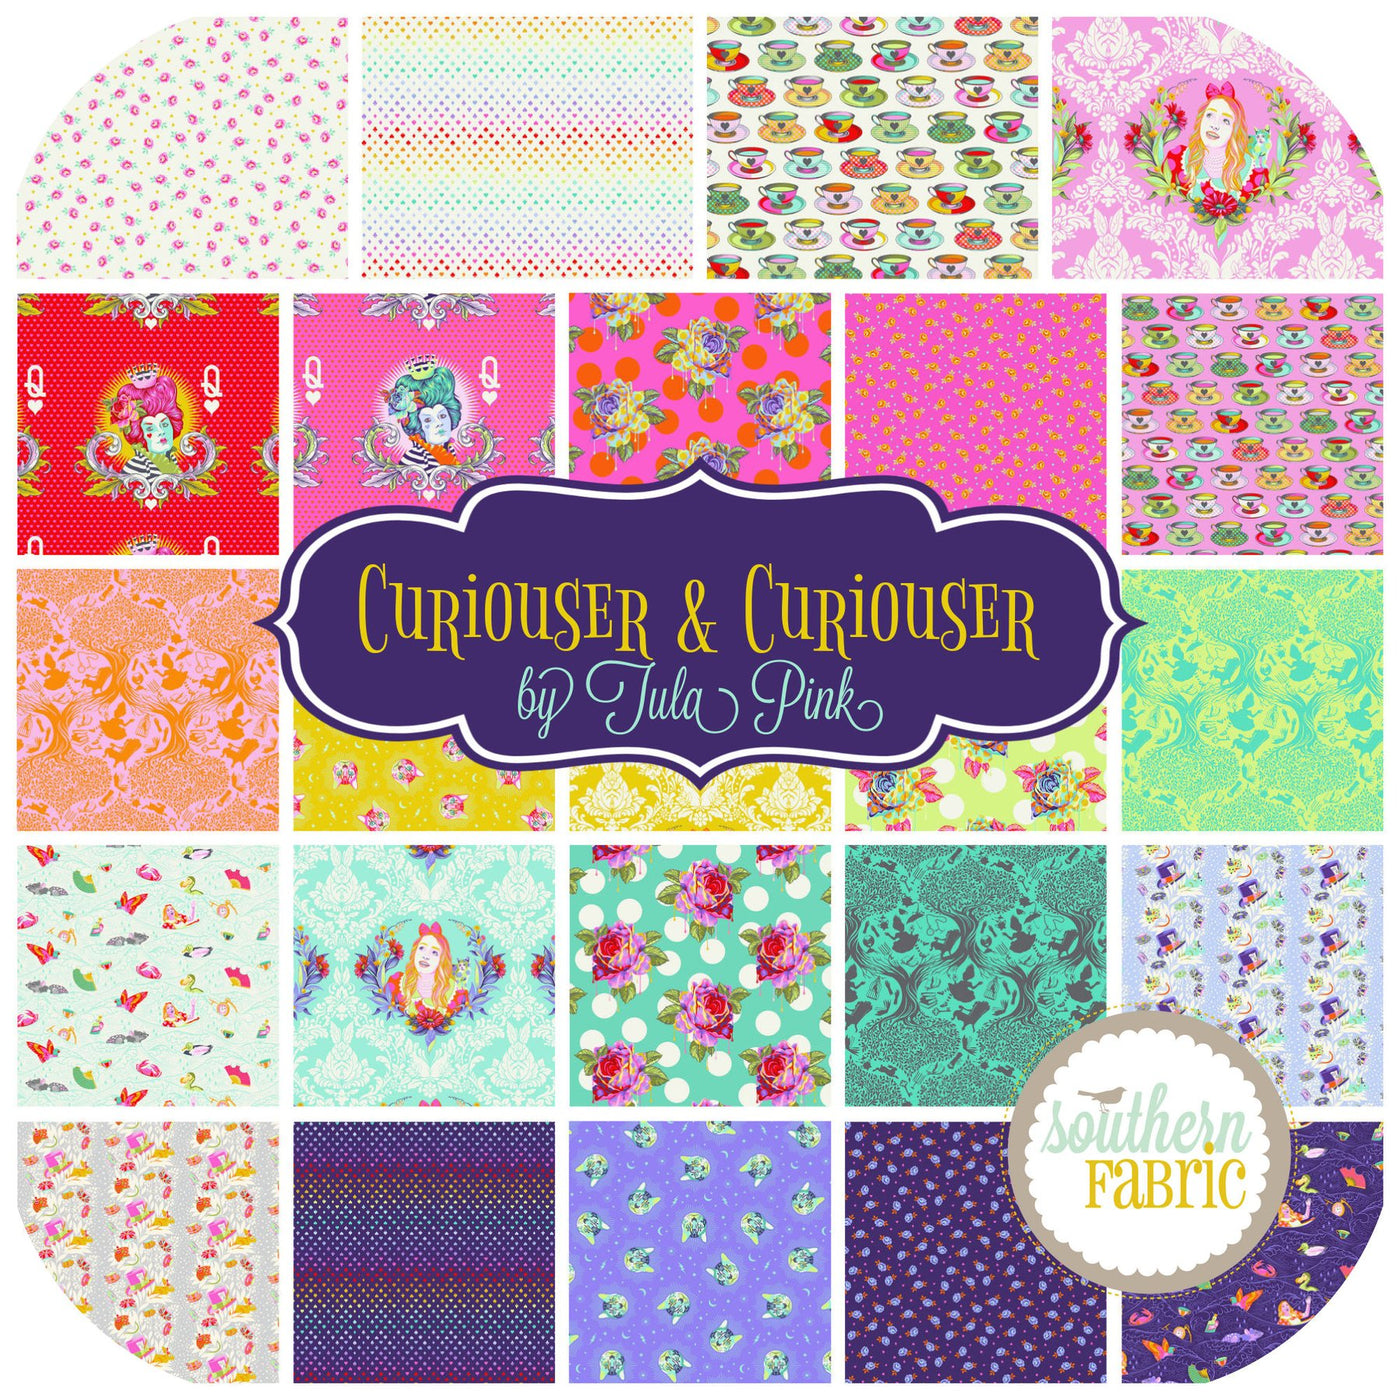 Curiouser and Curiouser Half Yard Bundle (25 pcs) by Tula Pink for Free Spirit